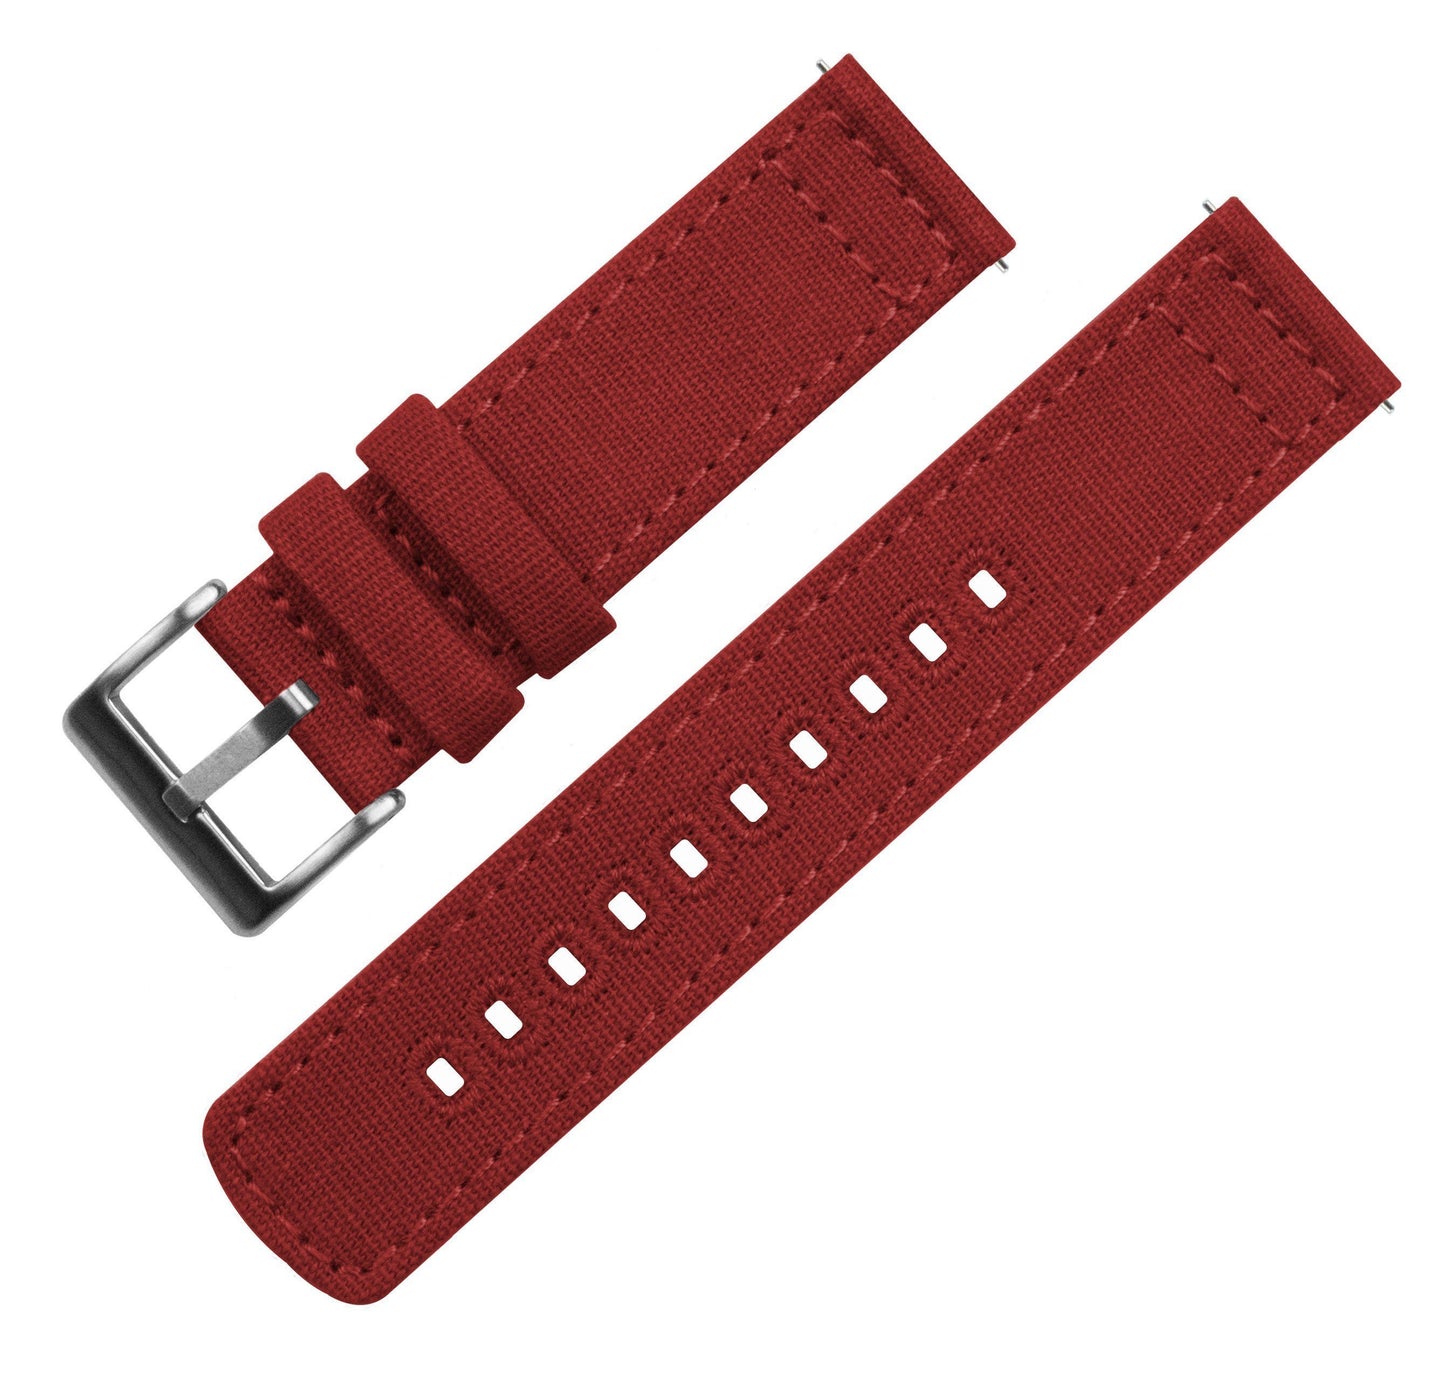 Fossil Q | Crimson Red Canvas - Barton Watch Bands